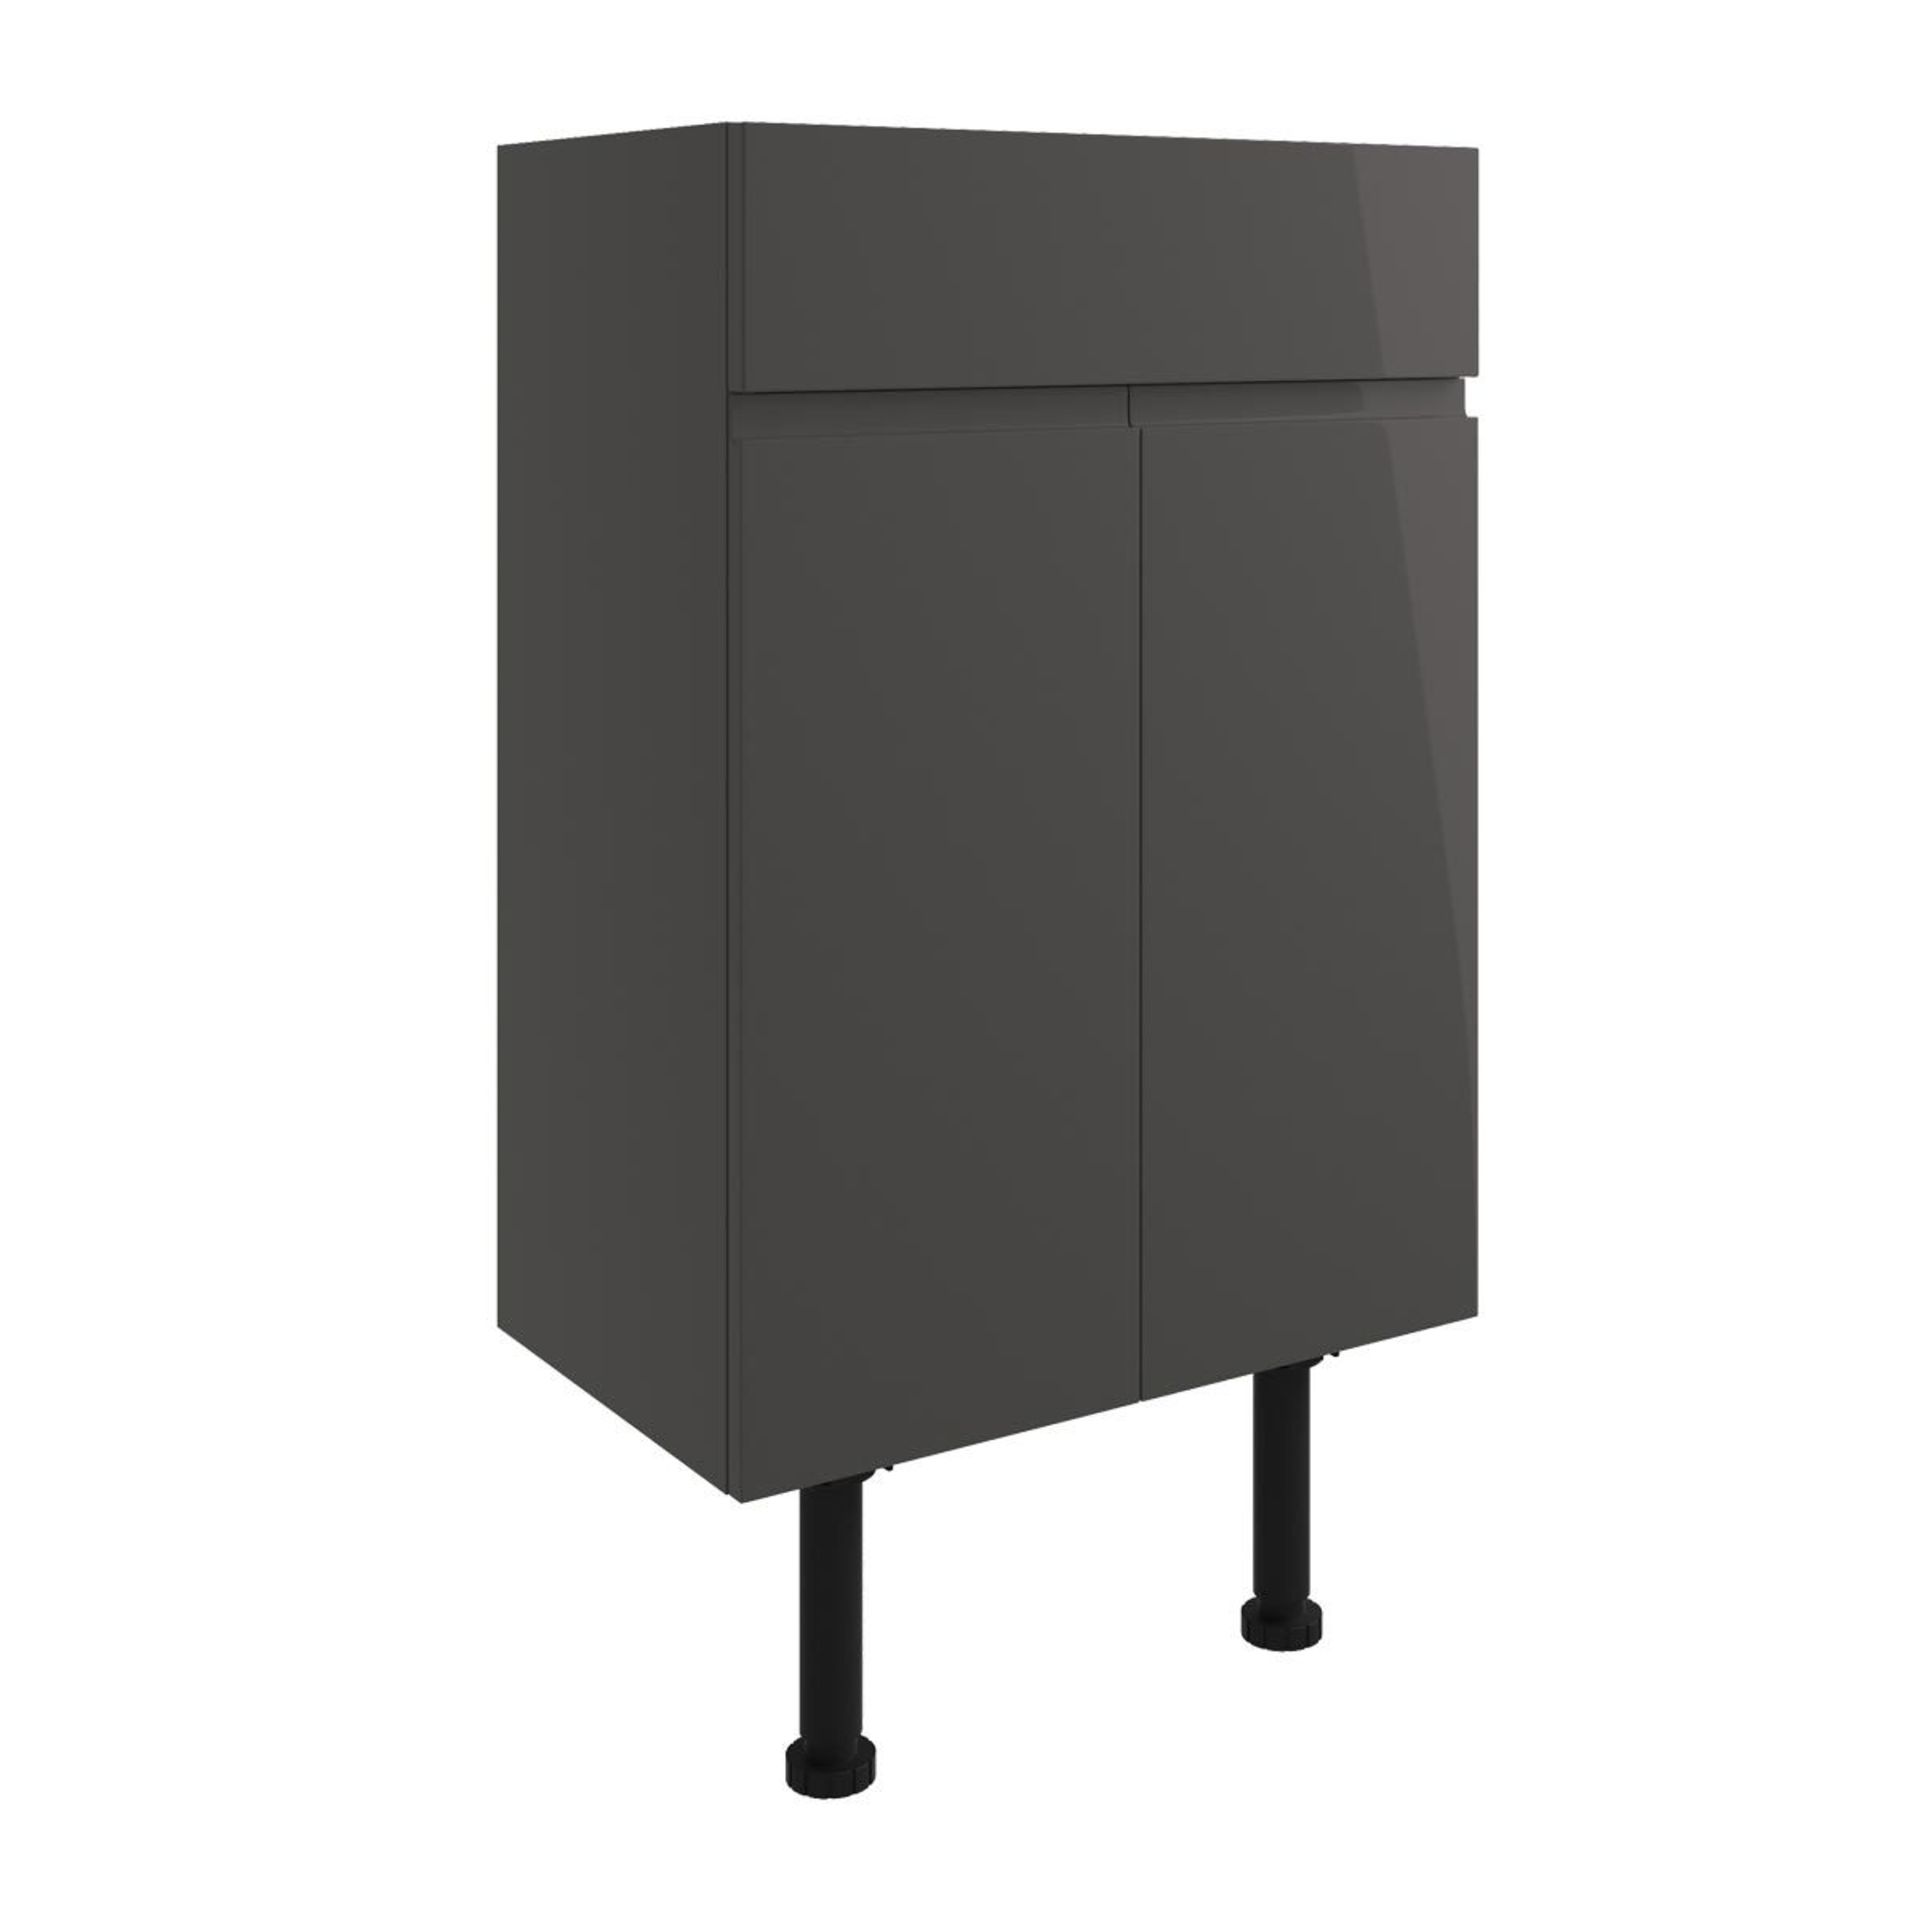 (SP41) New Valesso Onyx Grey Gloss Basin Unit 500mm. RRP £355.00 Valesso fitted furniture is